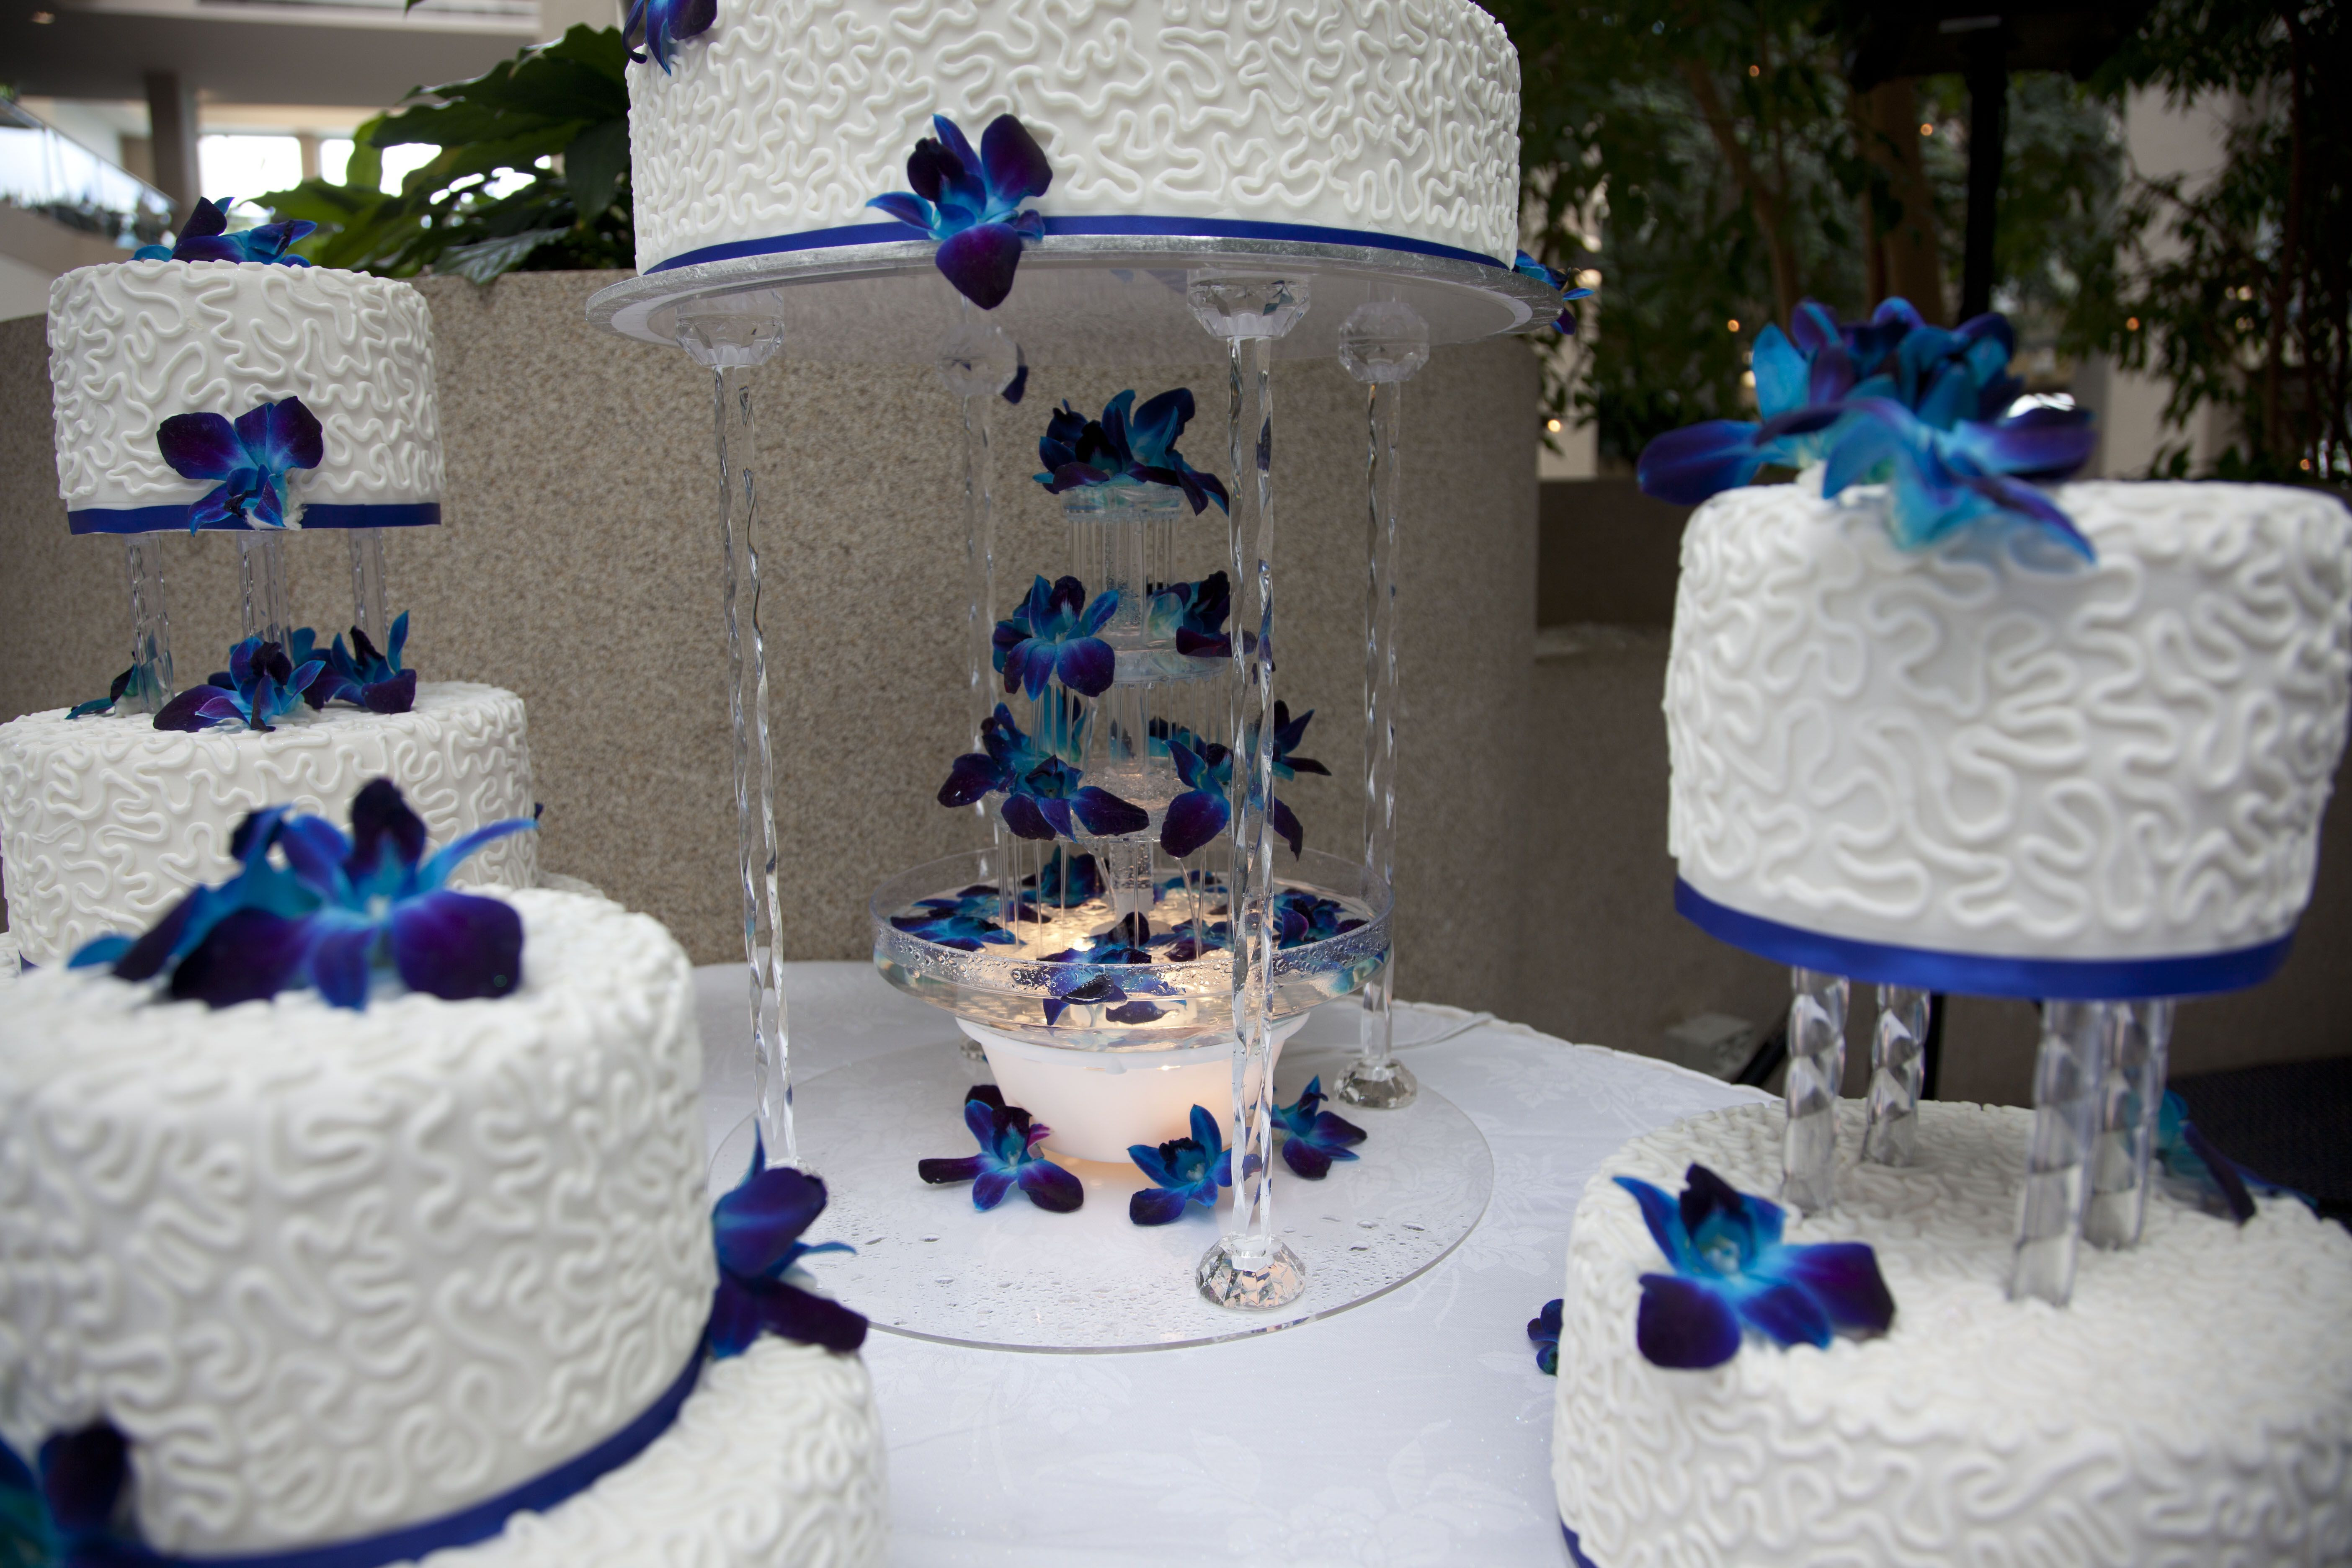 Wedding Cakes With Water Fountains
 water fountain under the royal blue wedding cake decorated